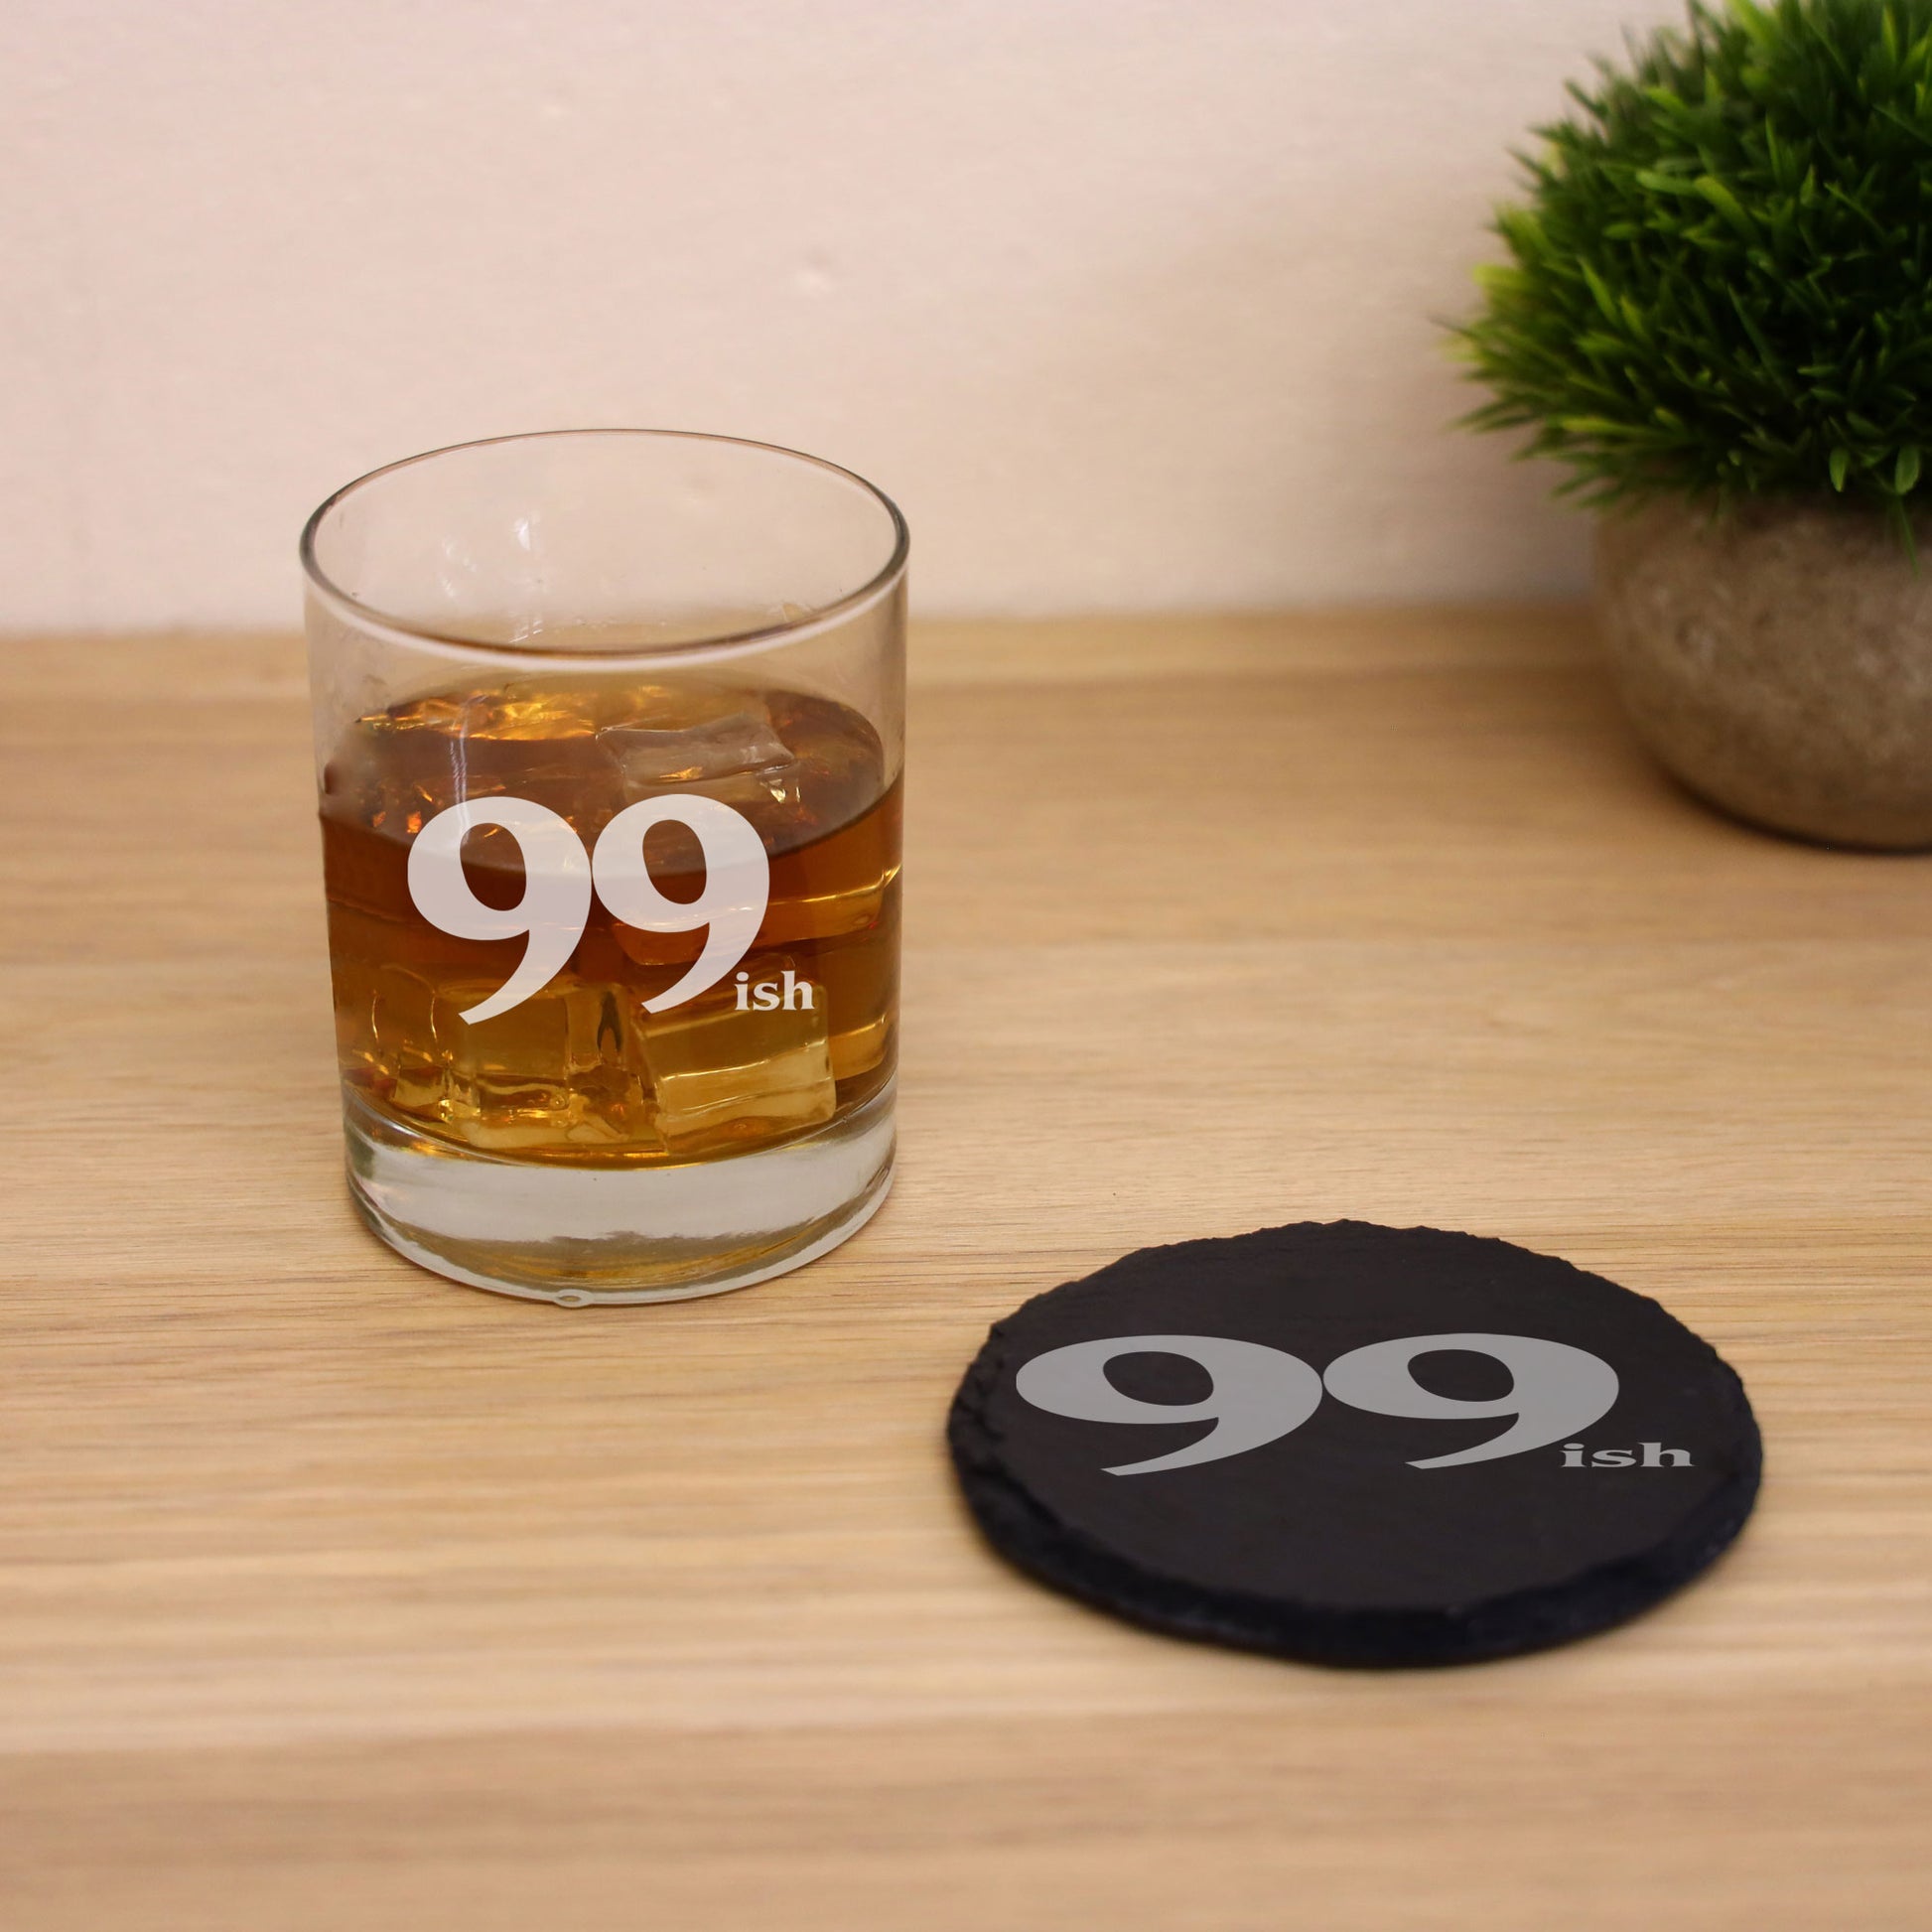 99ish Whisky Glass and/or Coaster Set  - Always Looking Good - Glass & Round Coaster Set  